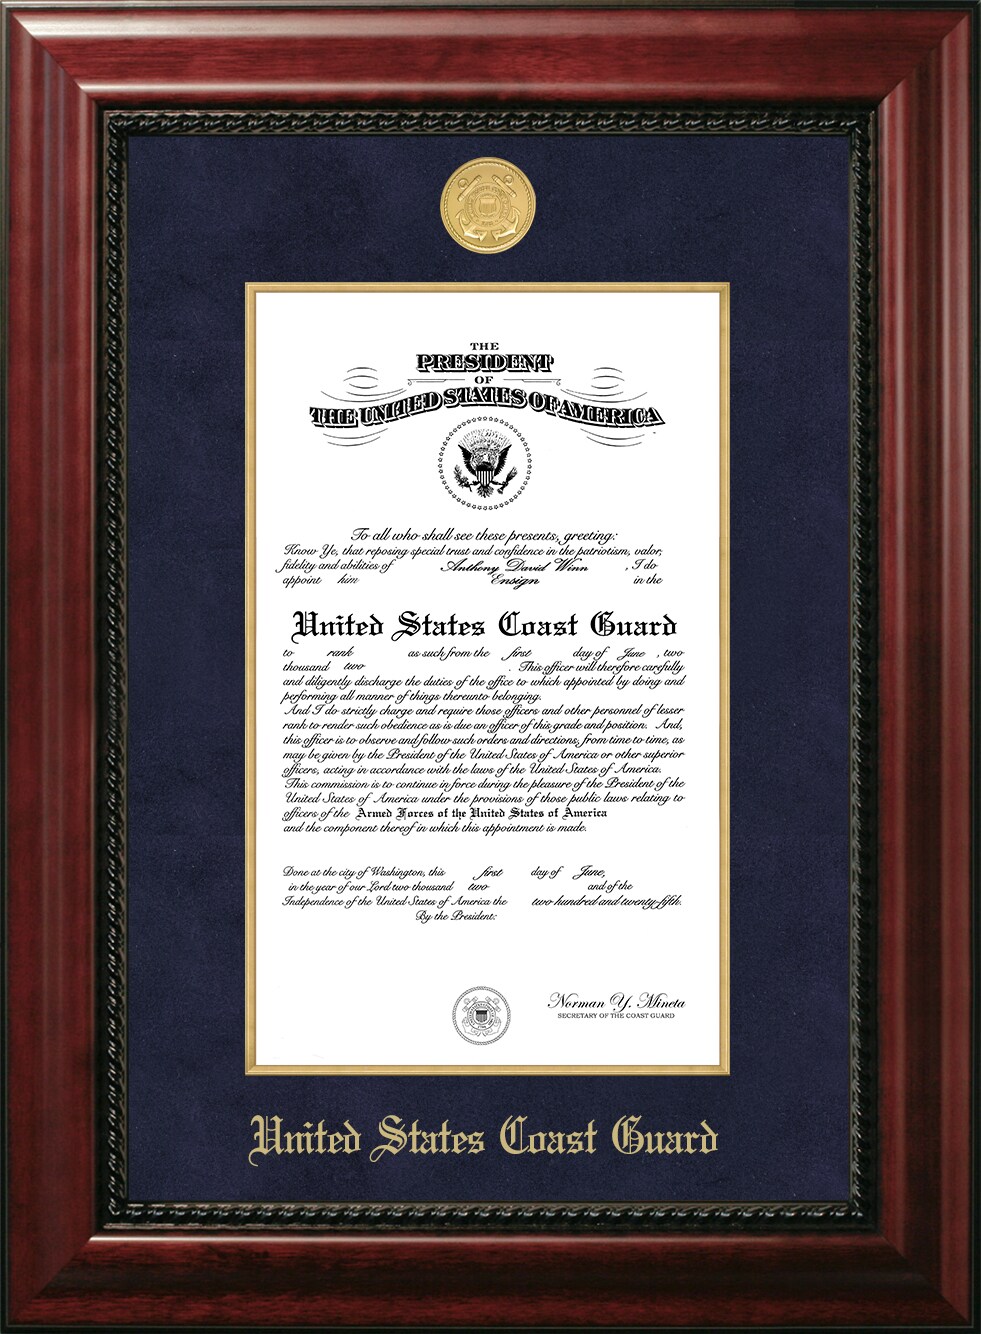 Patriot Frames Coast Guard 10x14 Certificate Executive Frame with Gold Medallion with Gold Filet